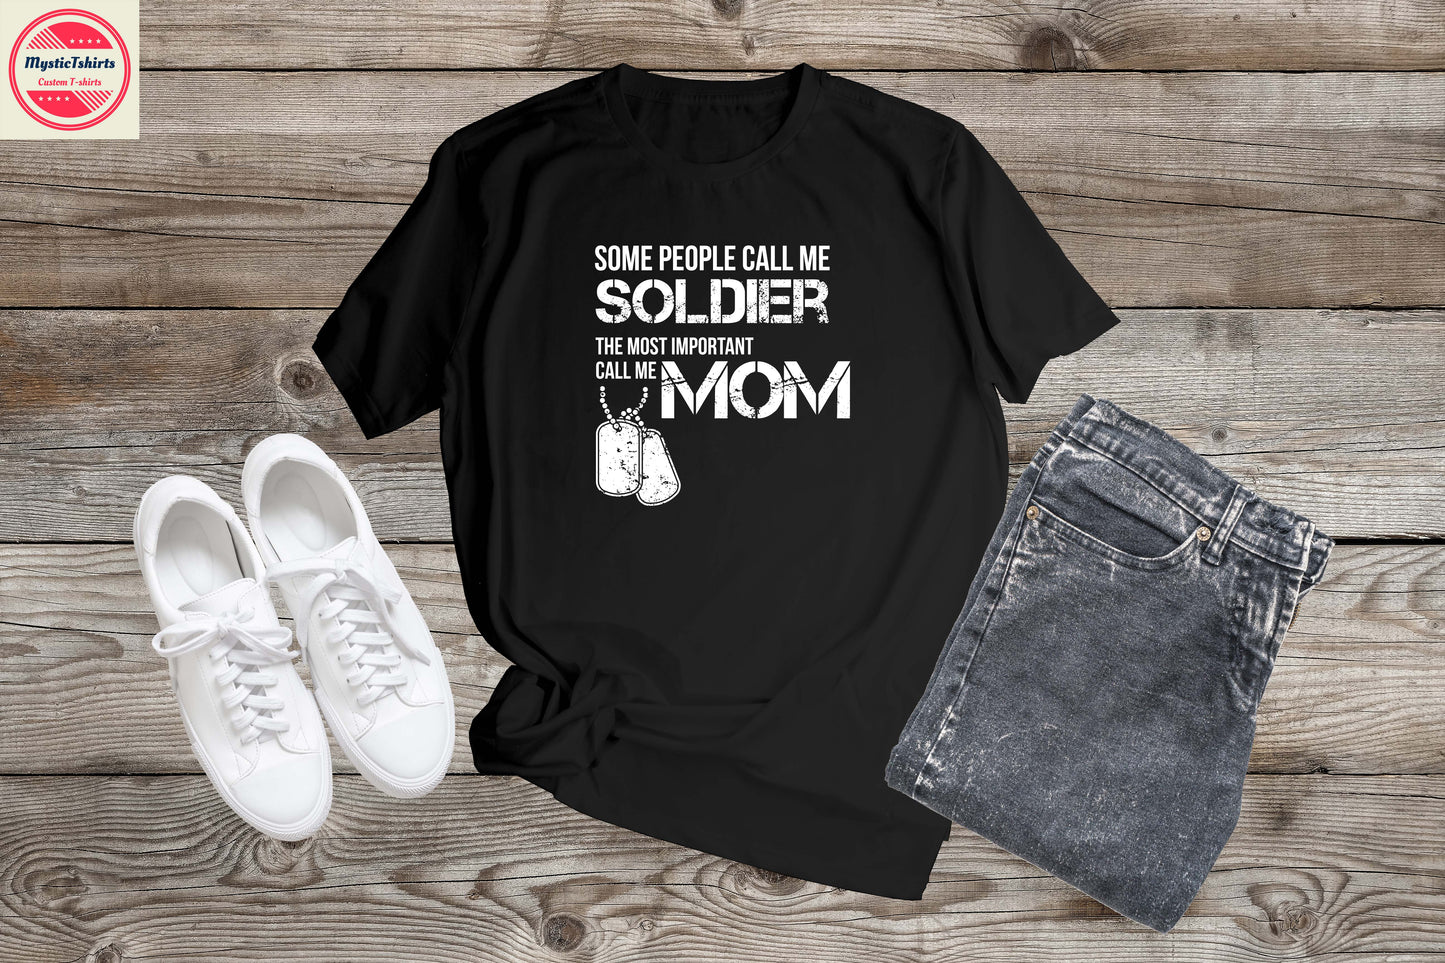 439. SOLDIER MOM, Custom Made Shirt, Personalized T-Shirt, Custom Text, Make Your Own Shirt, Custom Tee